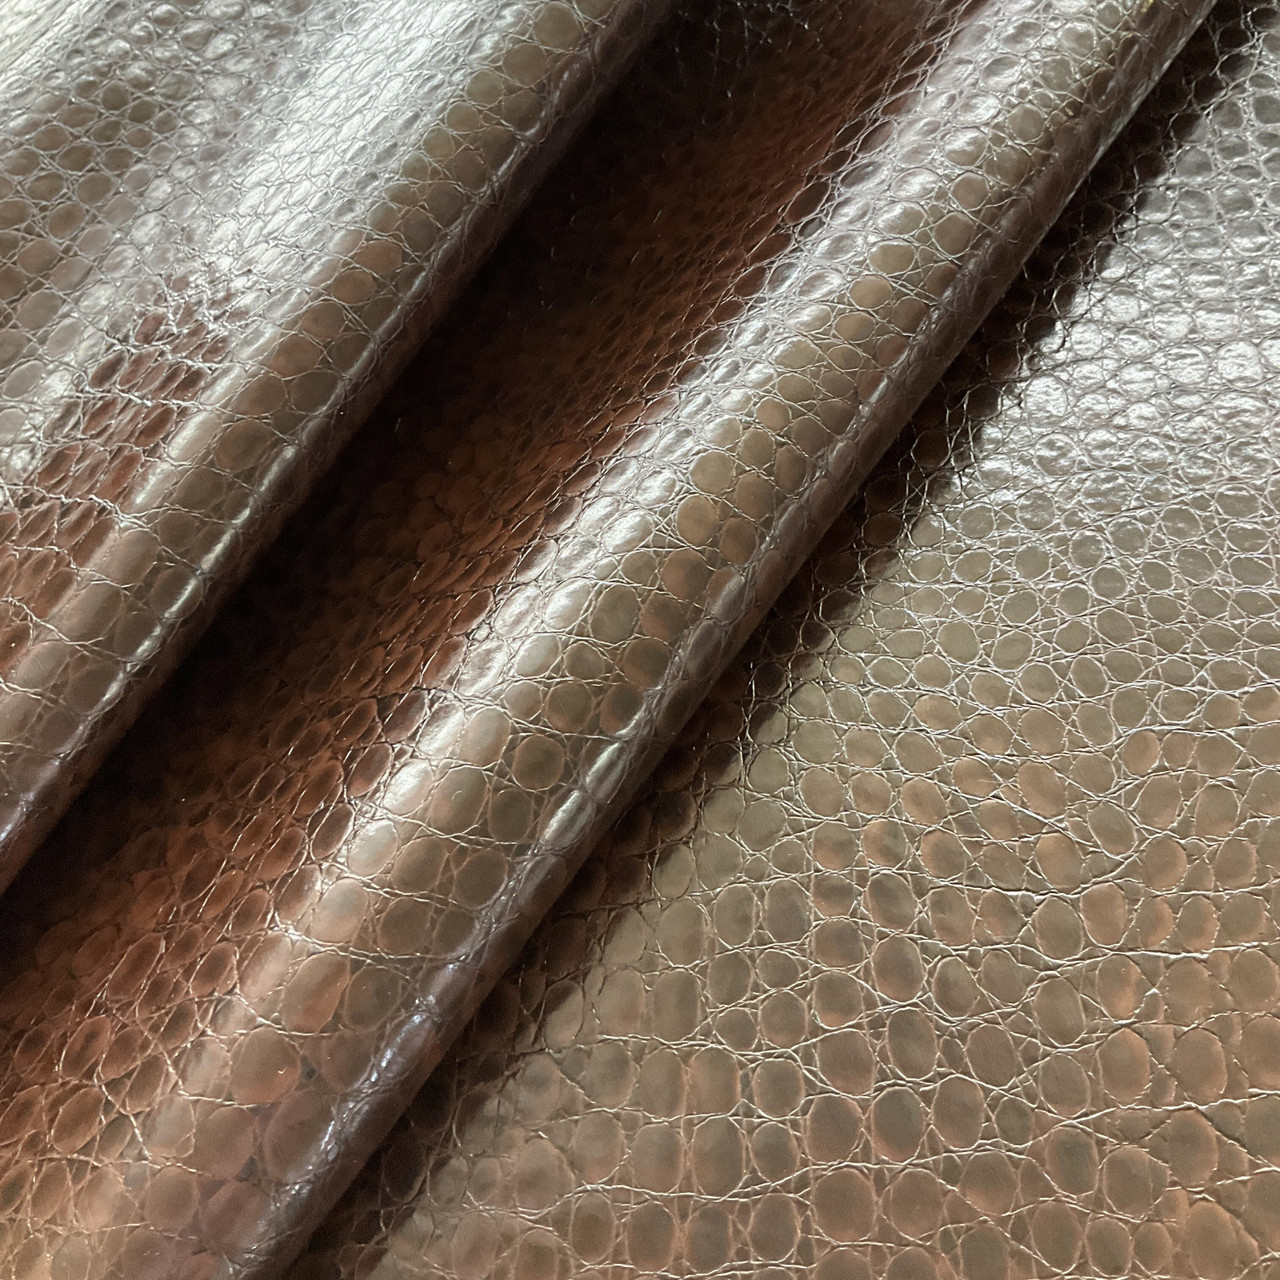 Faux Leather Crocodile Brown, Very Heavyweight Faux Leather Fabric, Home  Decor Fabric